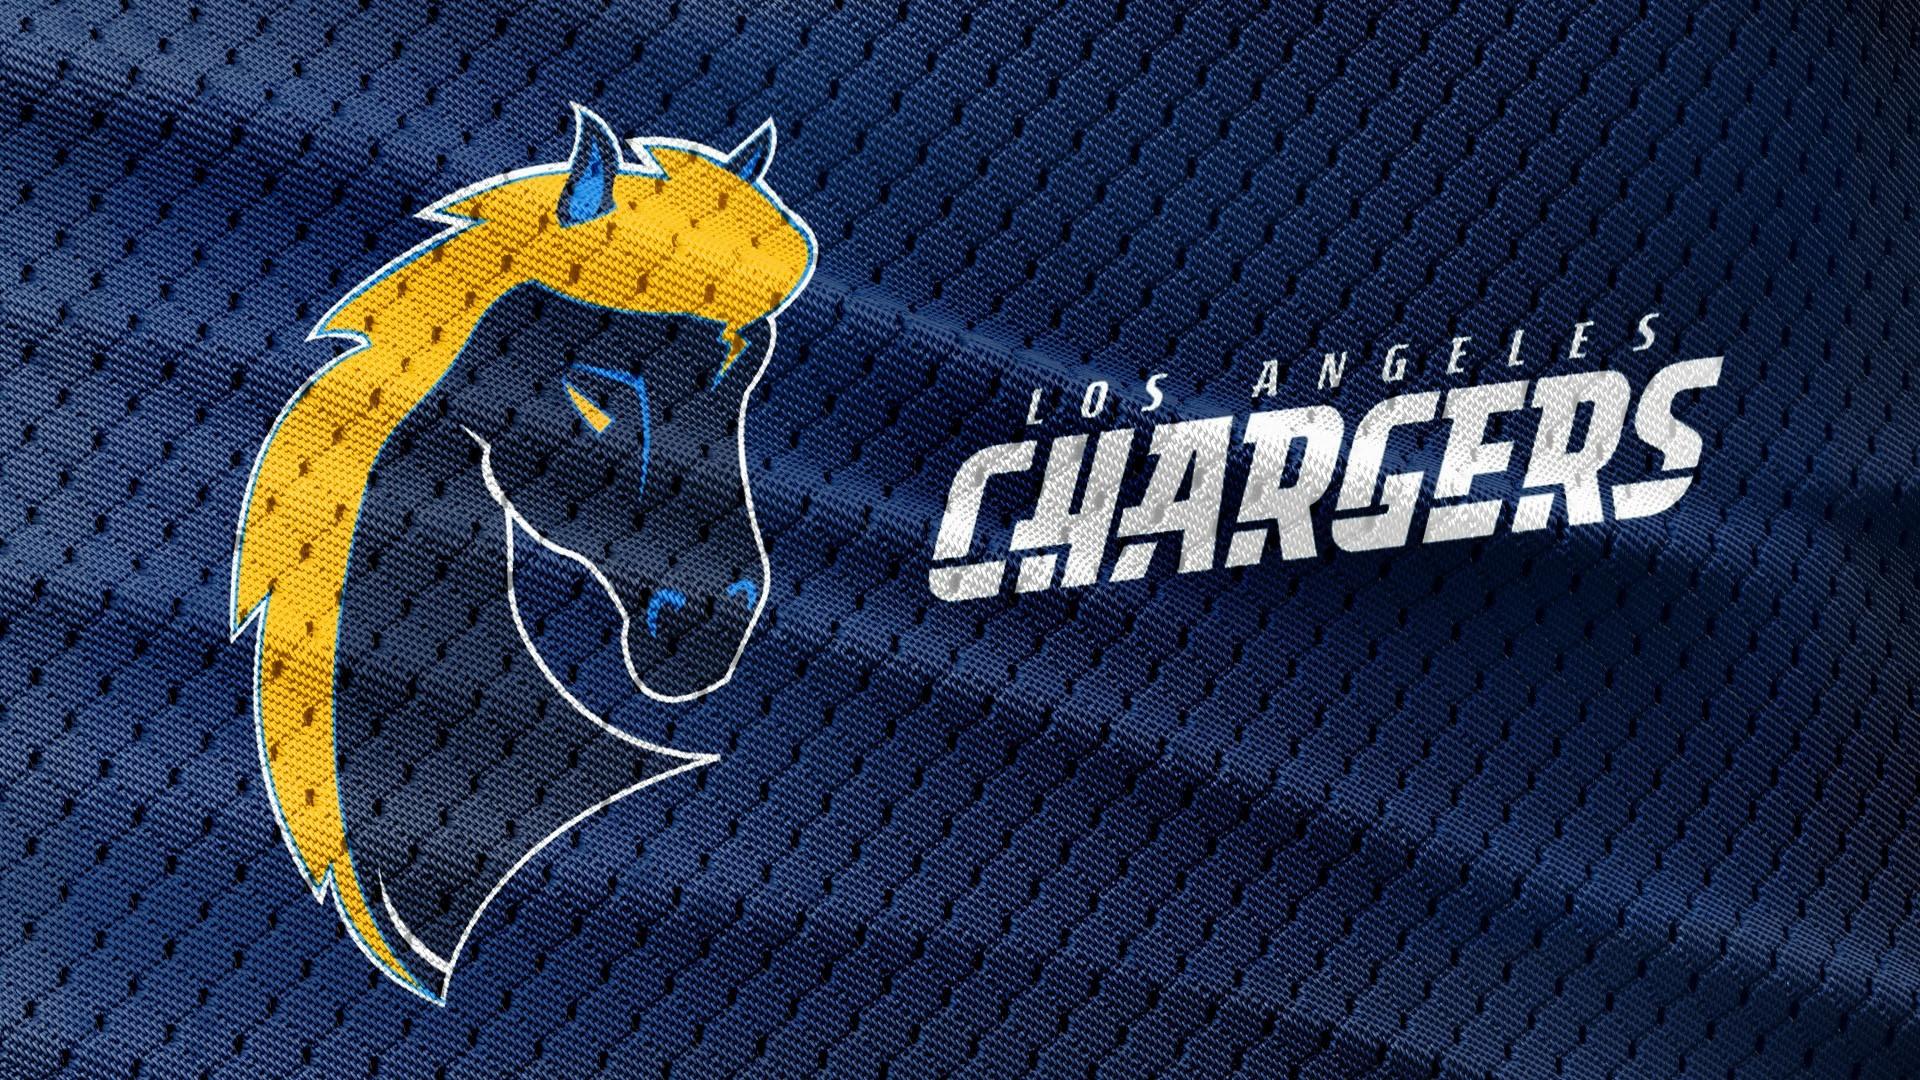 Los Angeles Chargers 2018 Wallpaper